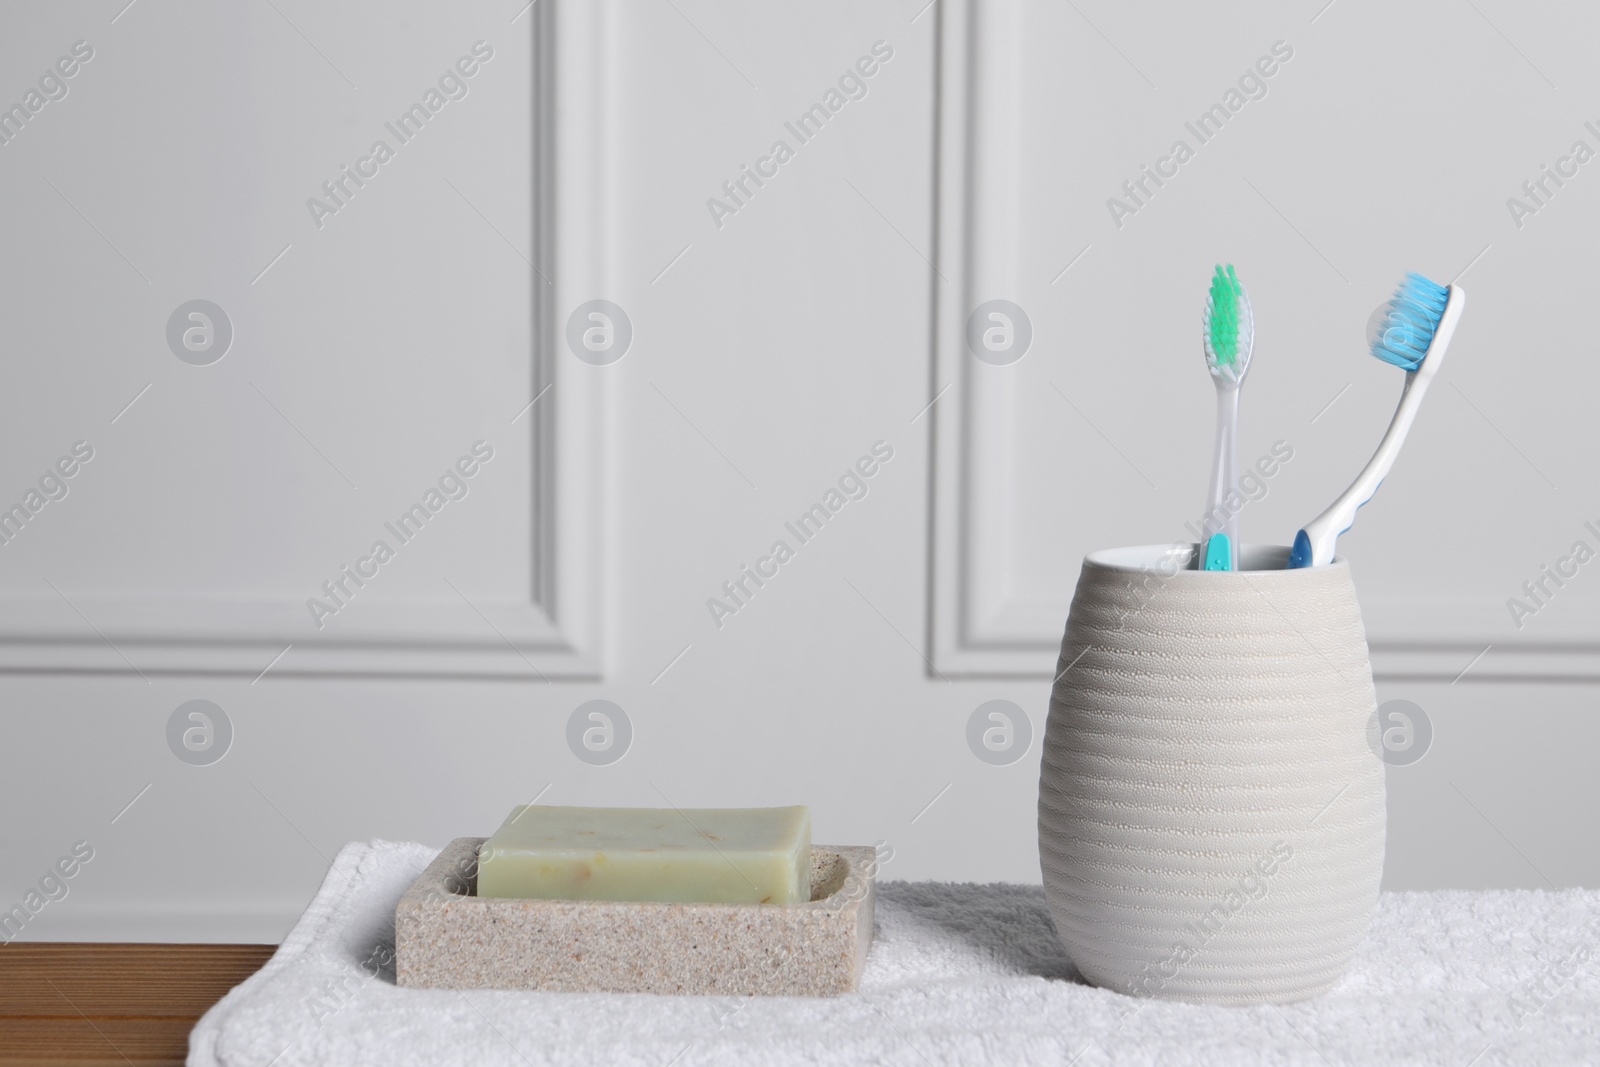 Photo of Plastic toothbrushes in holder, towel and soap bars on wooden table. Space for text